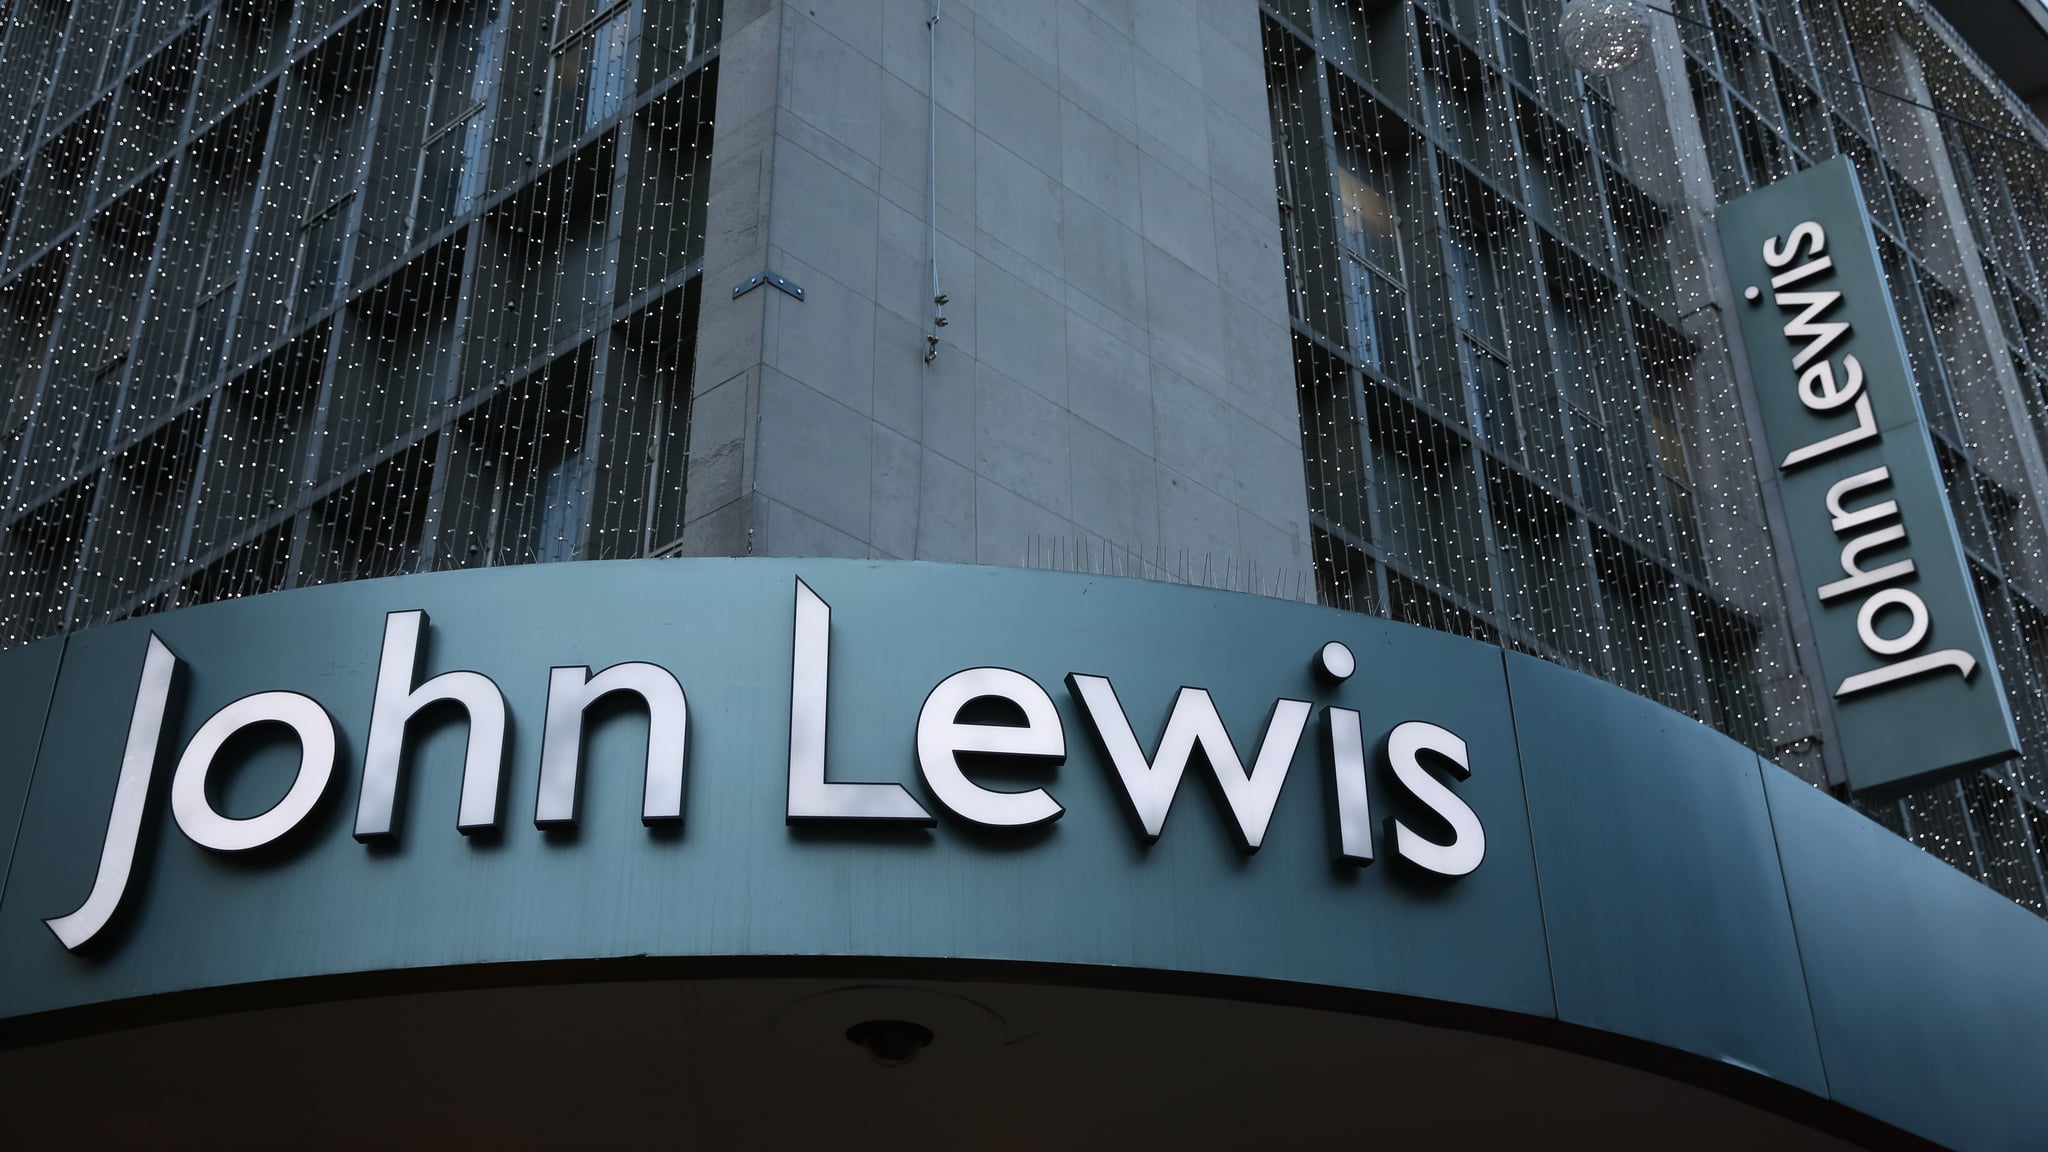 John Lewis Launches Beauty Recycling Scheme - Commercial Building , HD Wallpaper & Backgrounds